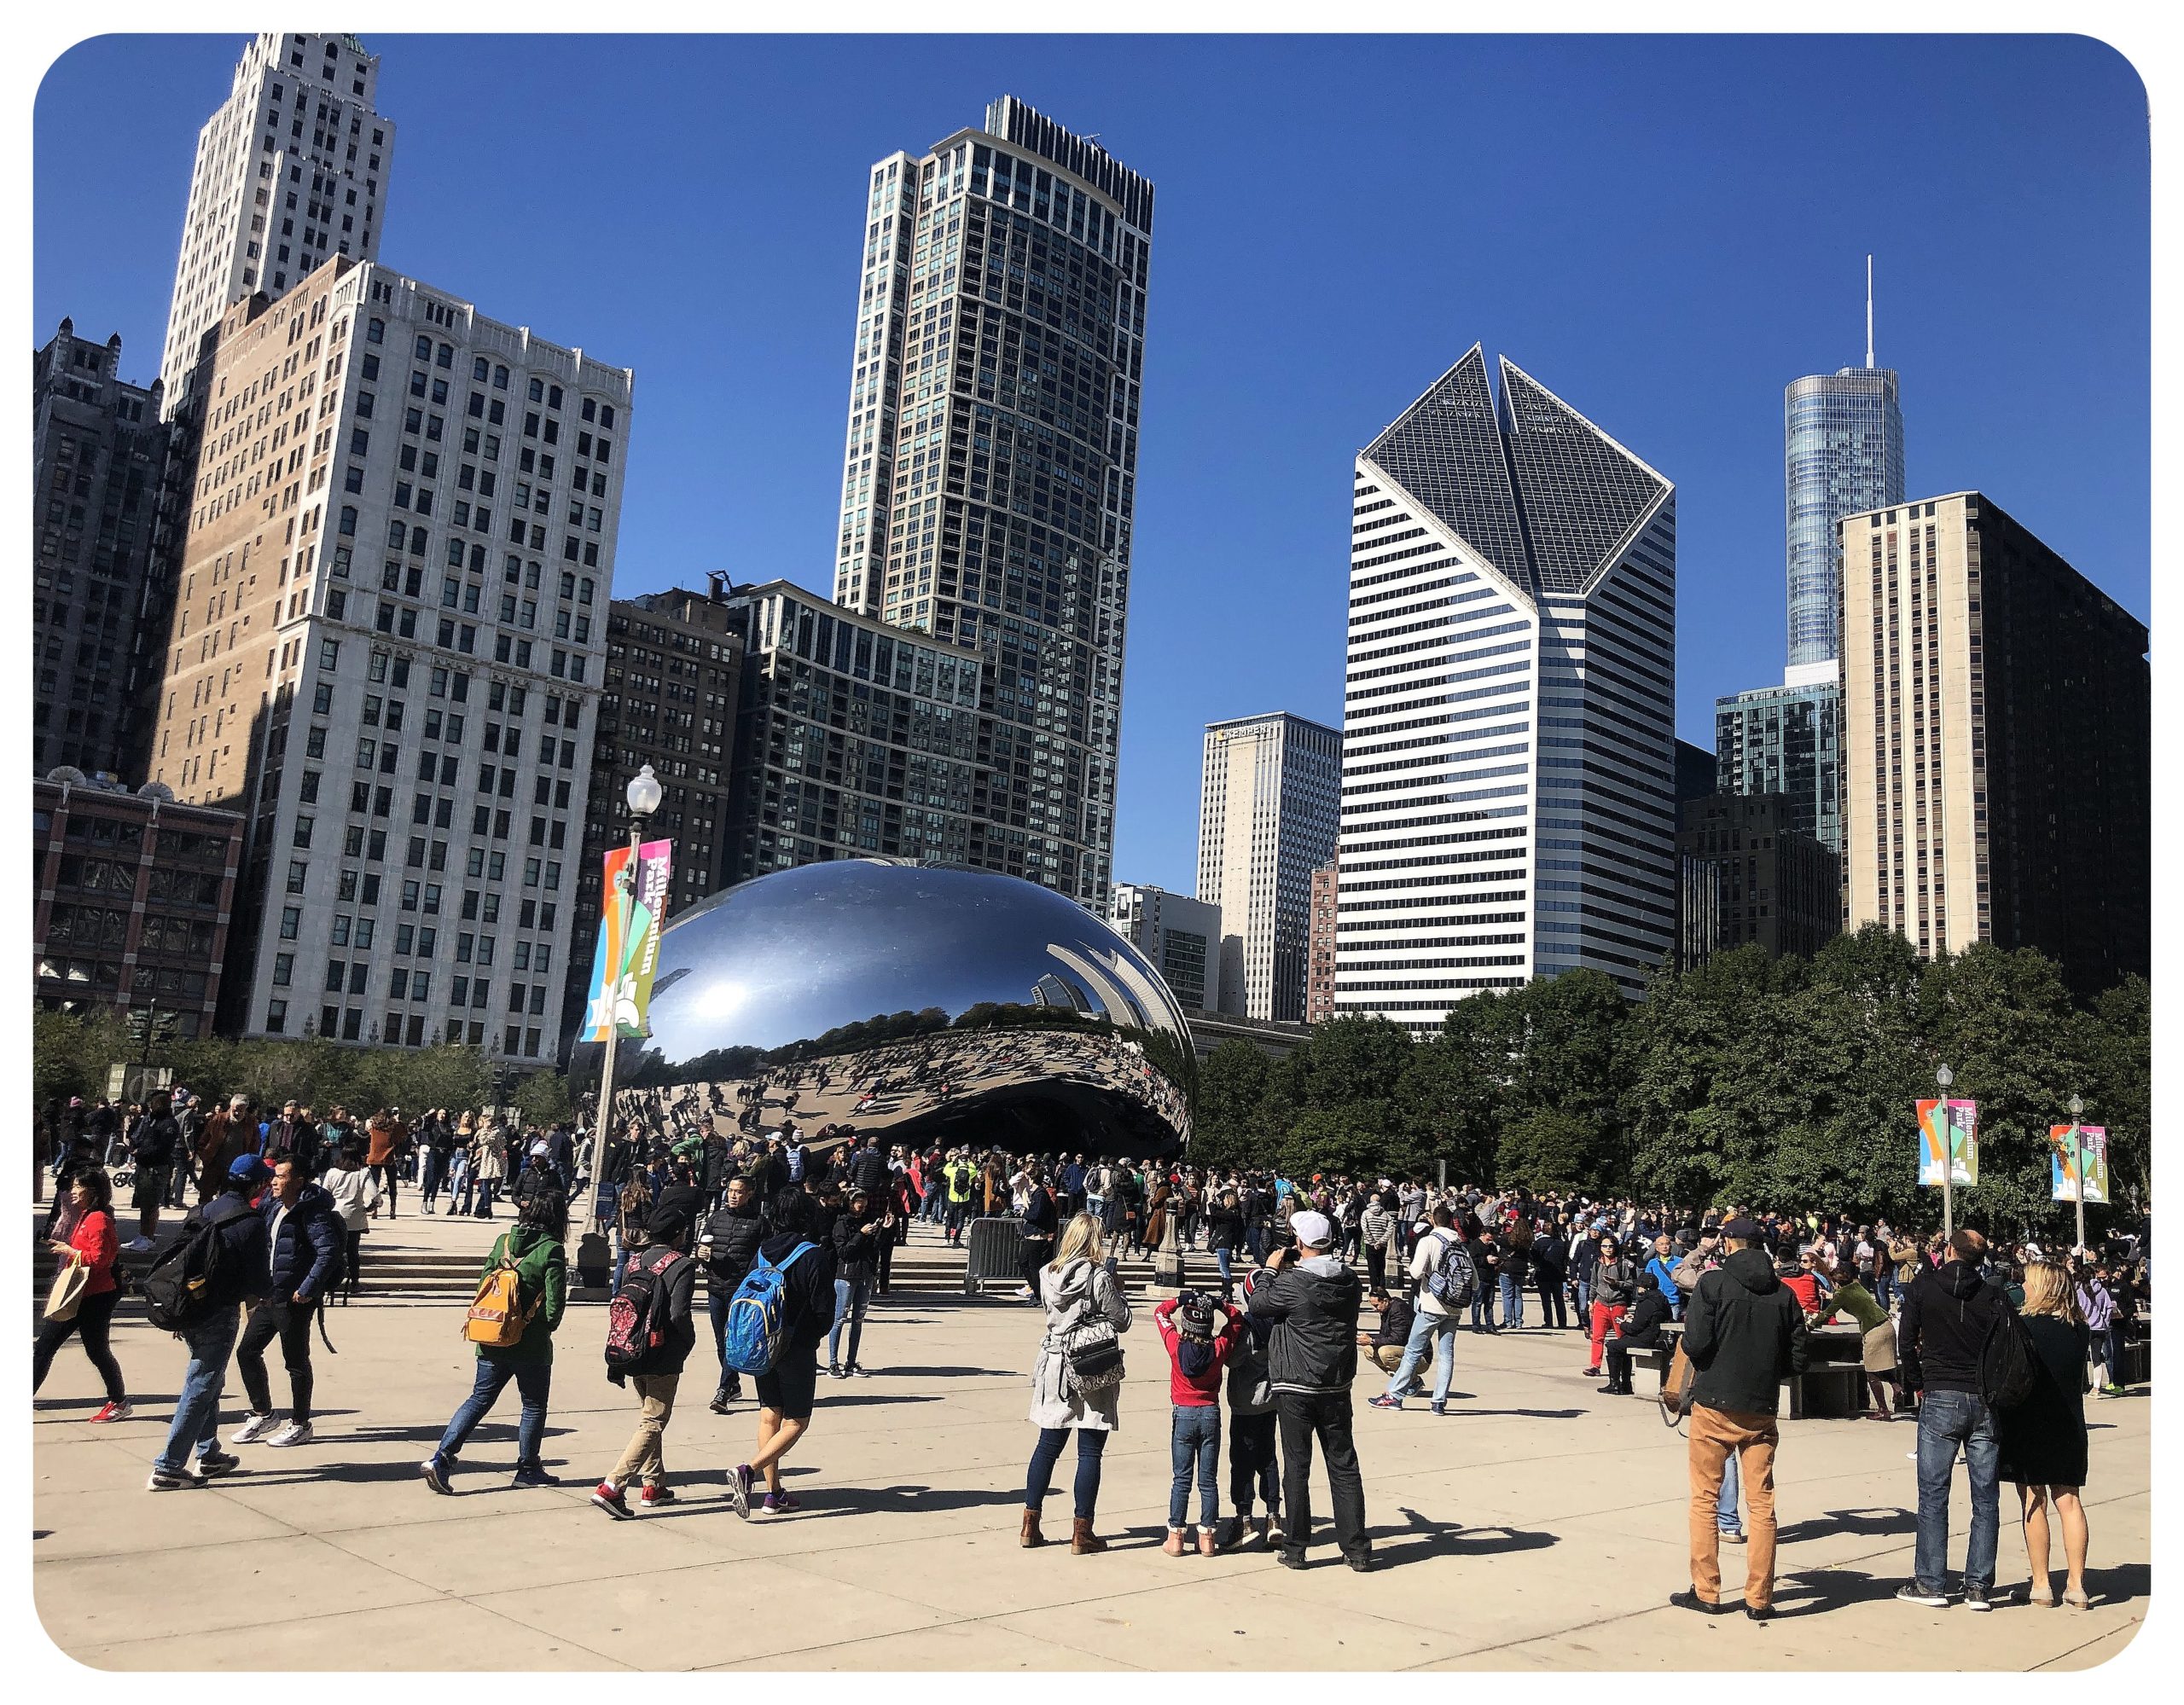 33 Things We Love About Chicago